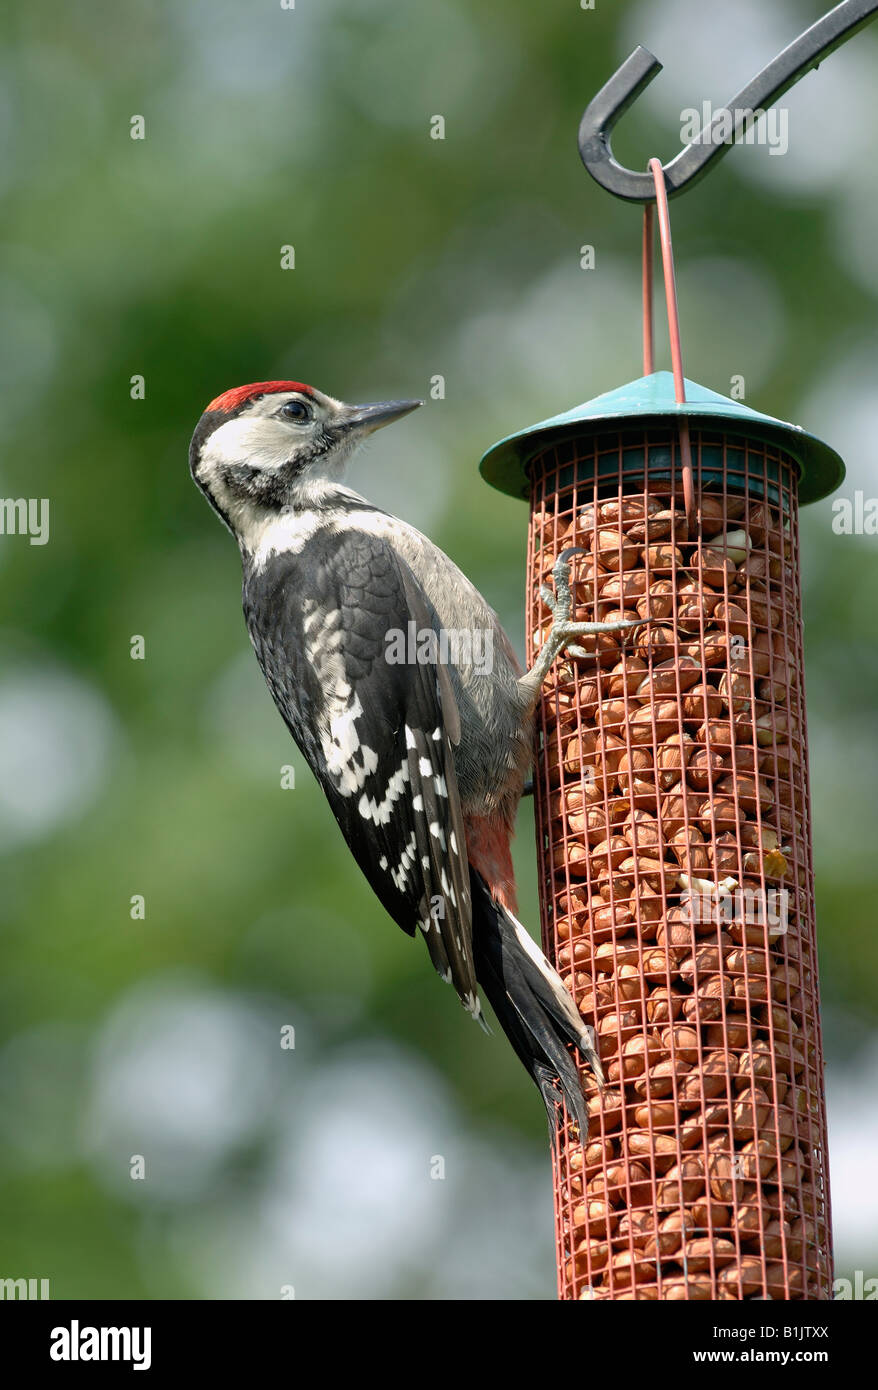 Juvenile great spotted woodpecker at a peanut feeder Stock Photo